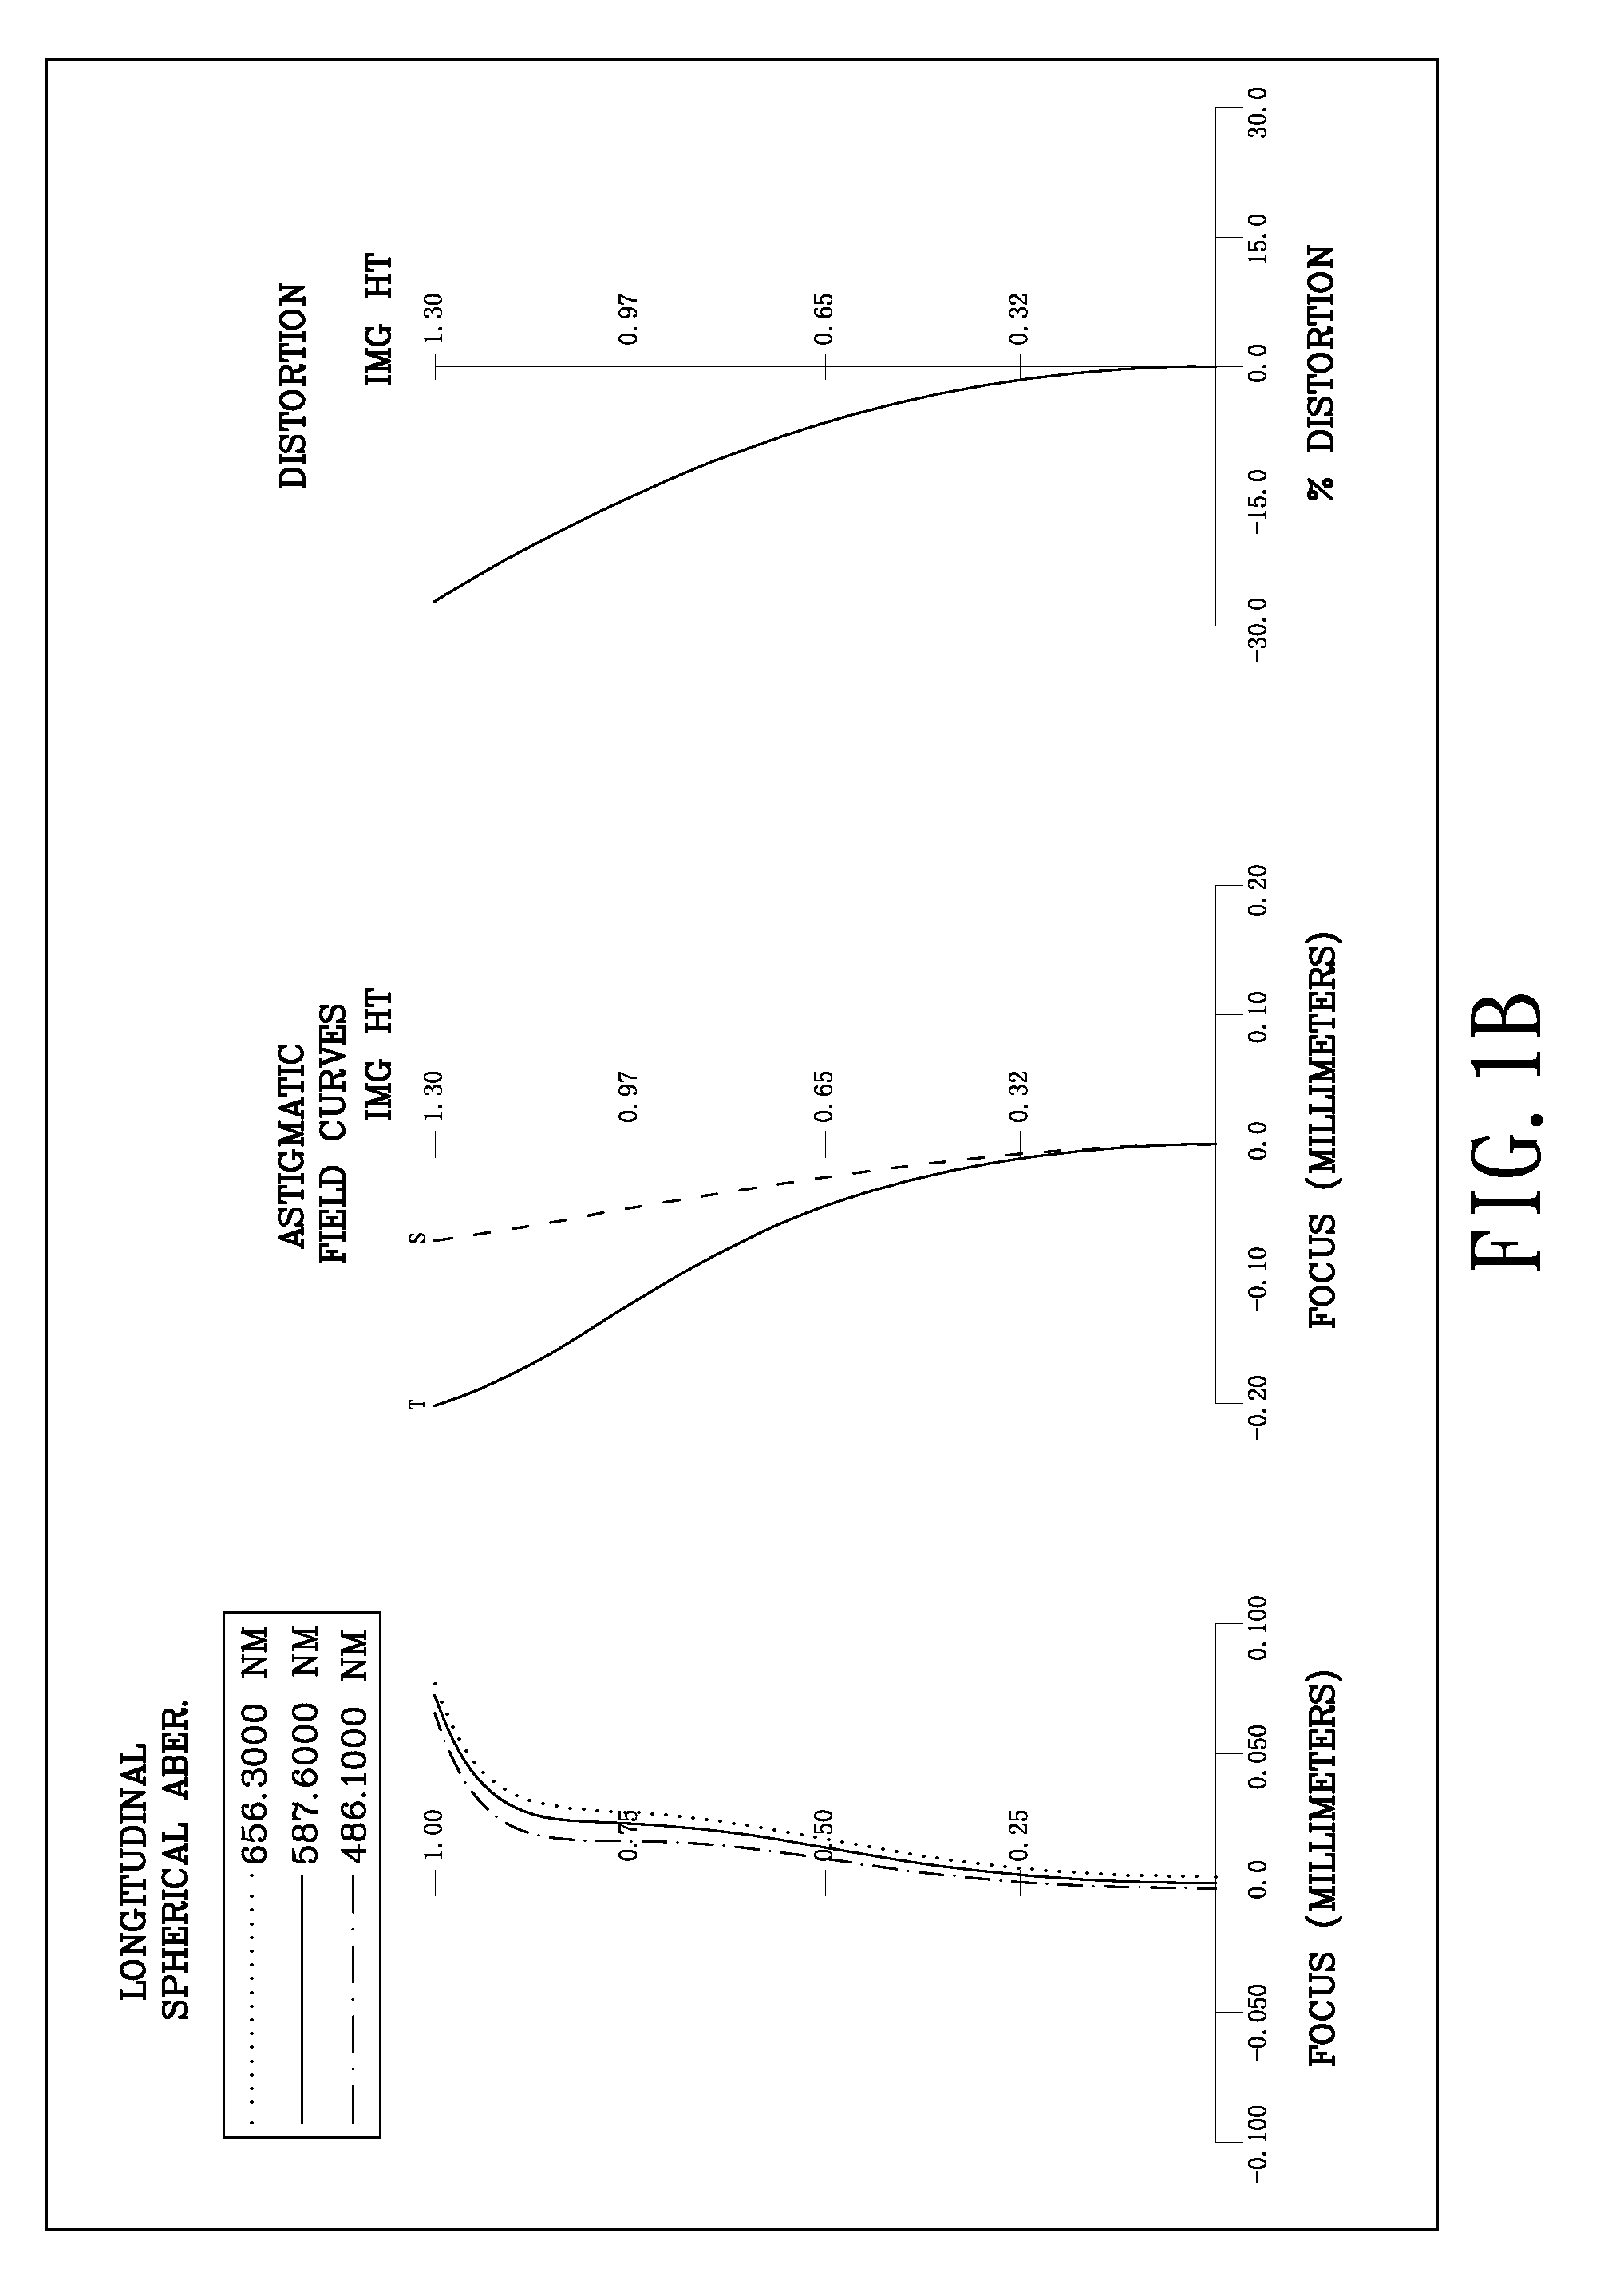 Optical lens system with a wide field of view